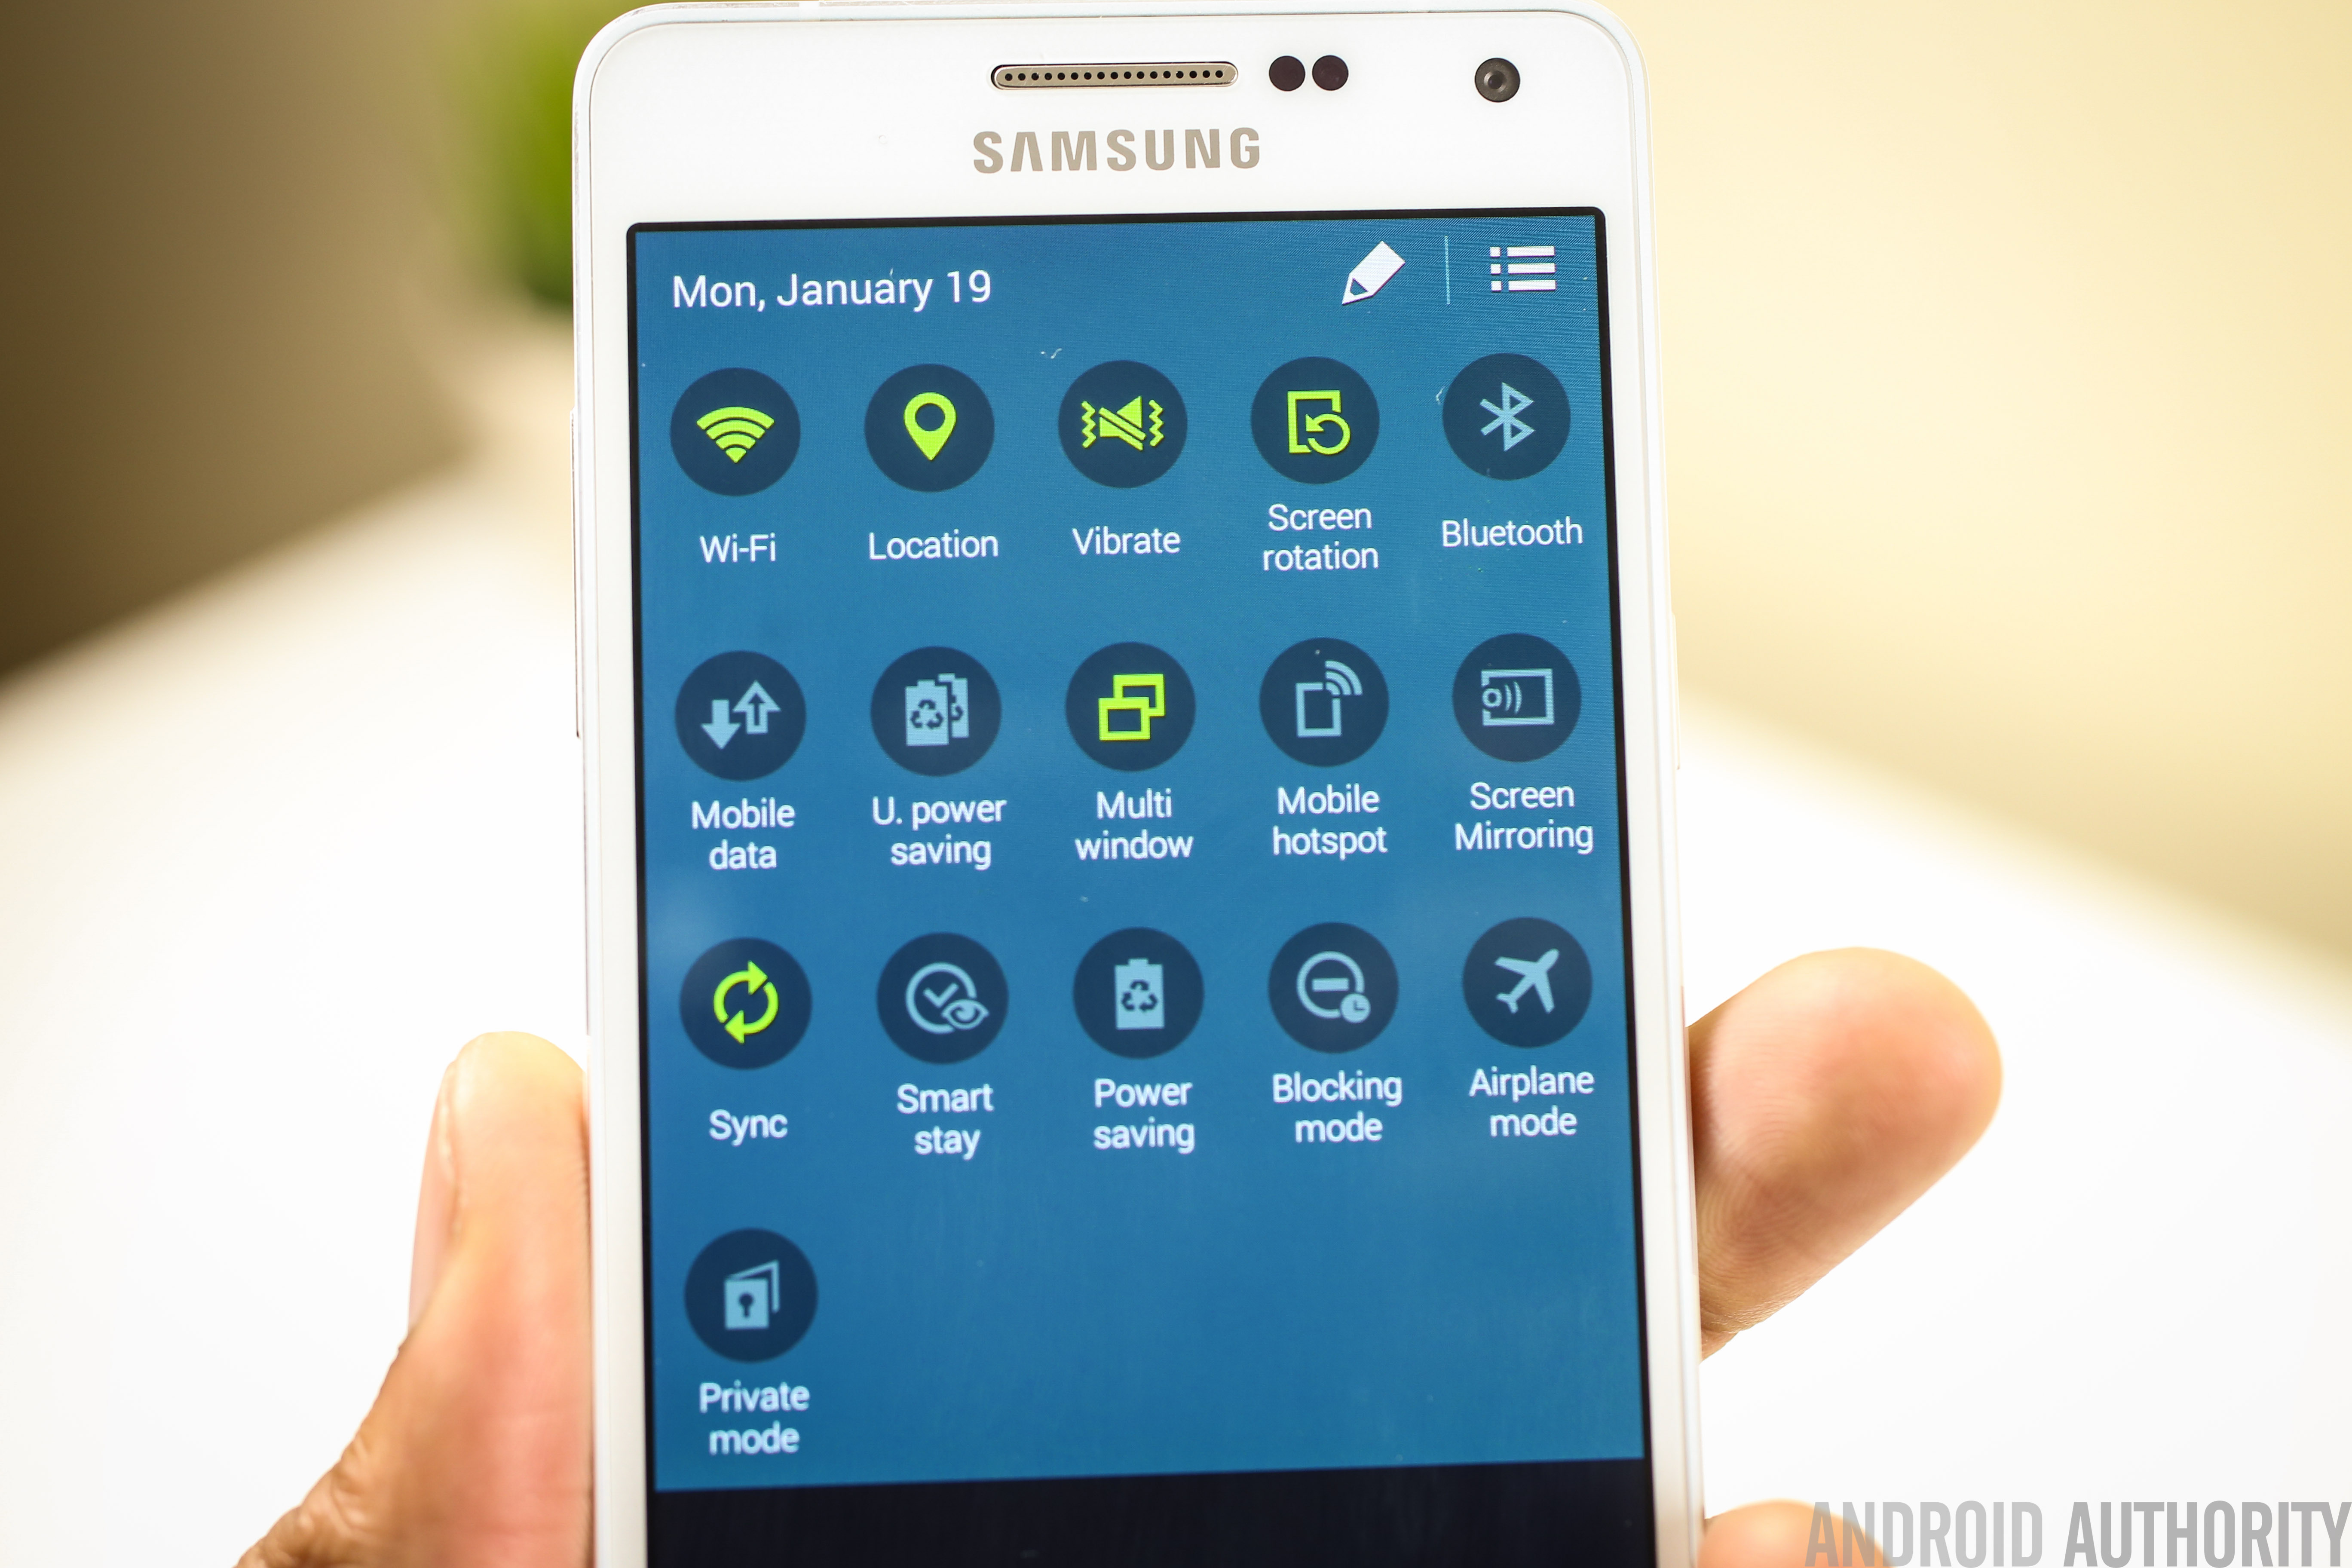 Samsung Galaxy A5 Review, Does Samsung Galaxy A5 Have Screen Mirroring